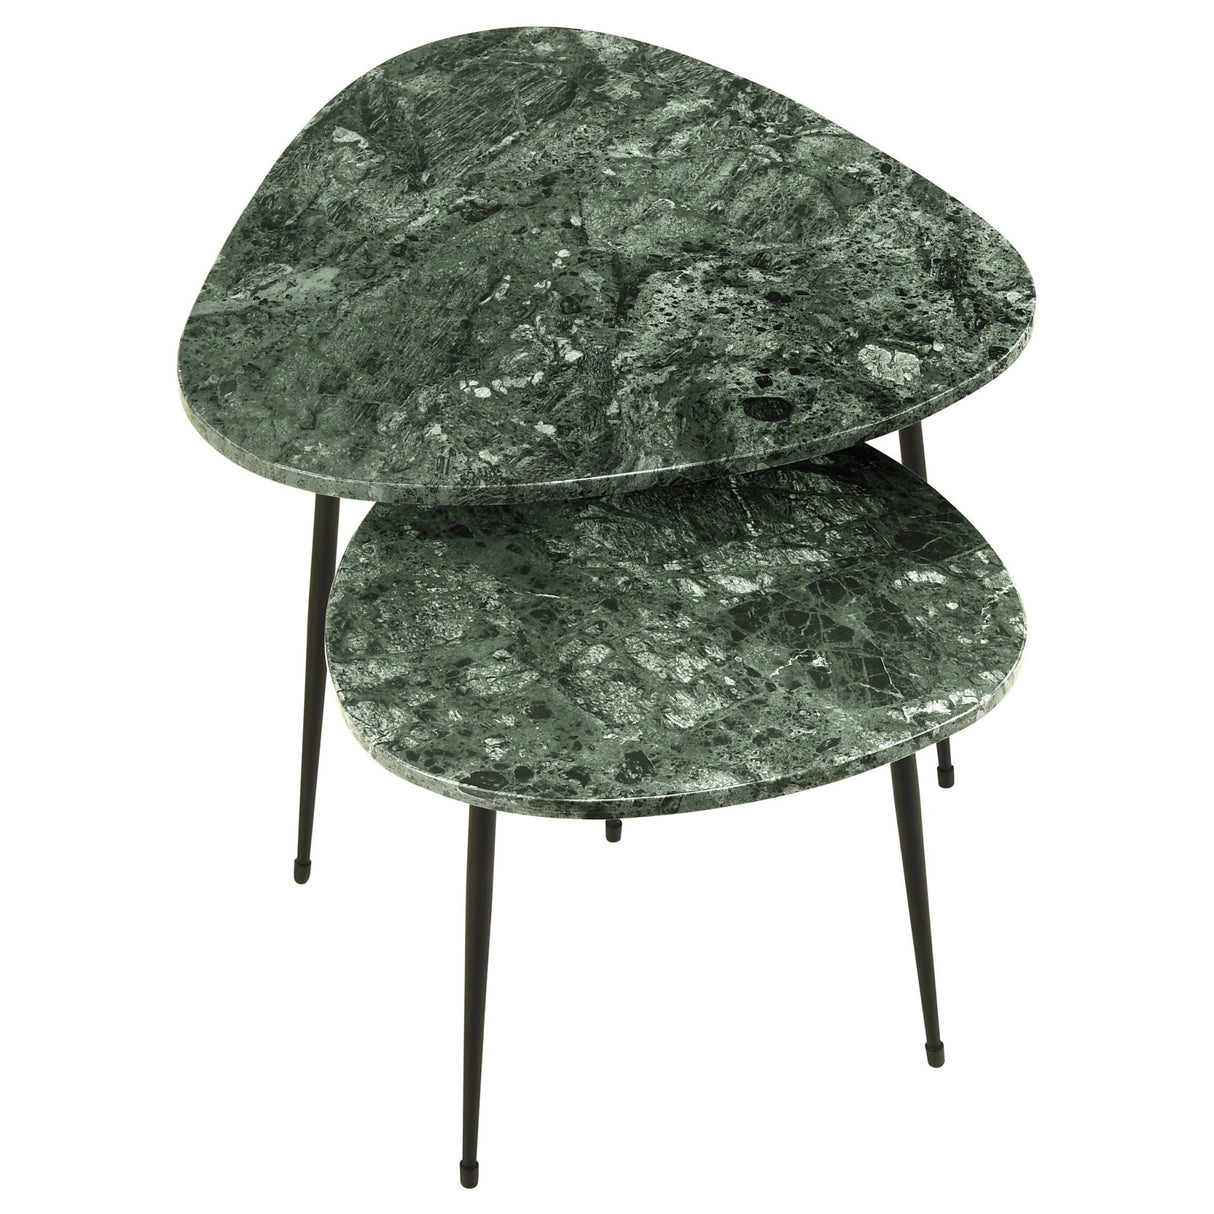 2 Pc Nesting Table - Tobias 2-piece Triangular Marble Top Nesting Table Green and Black